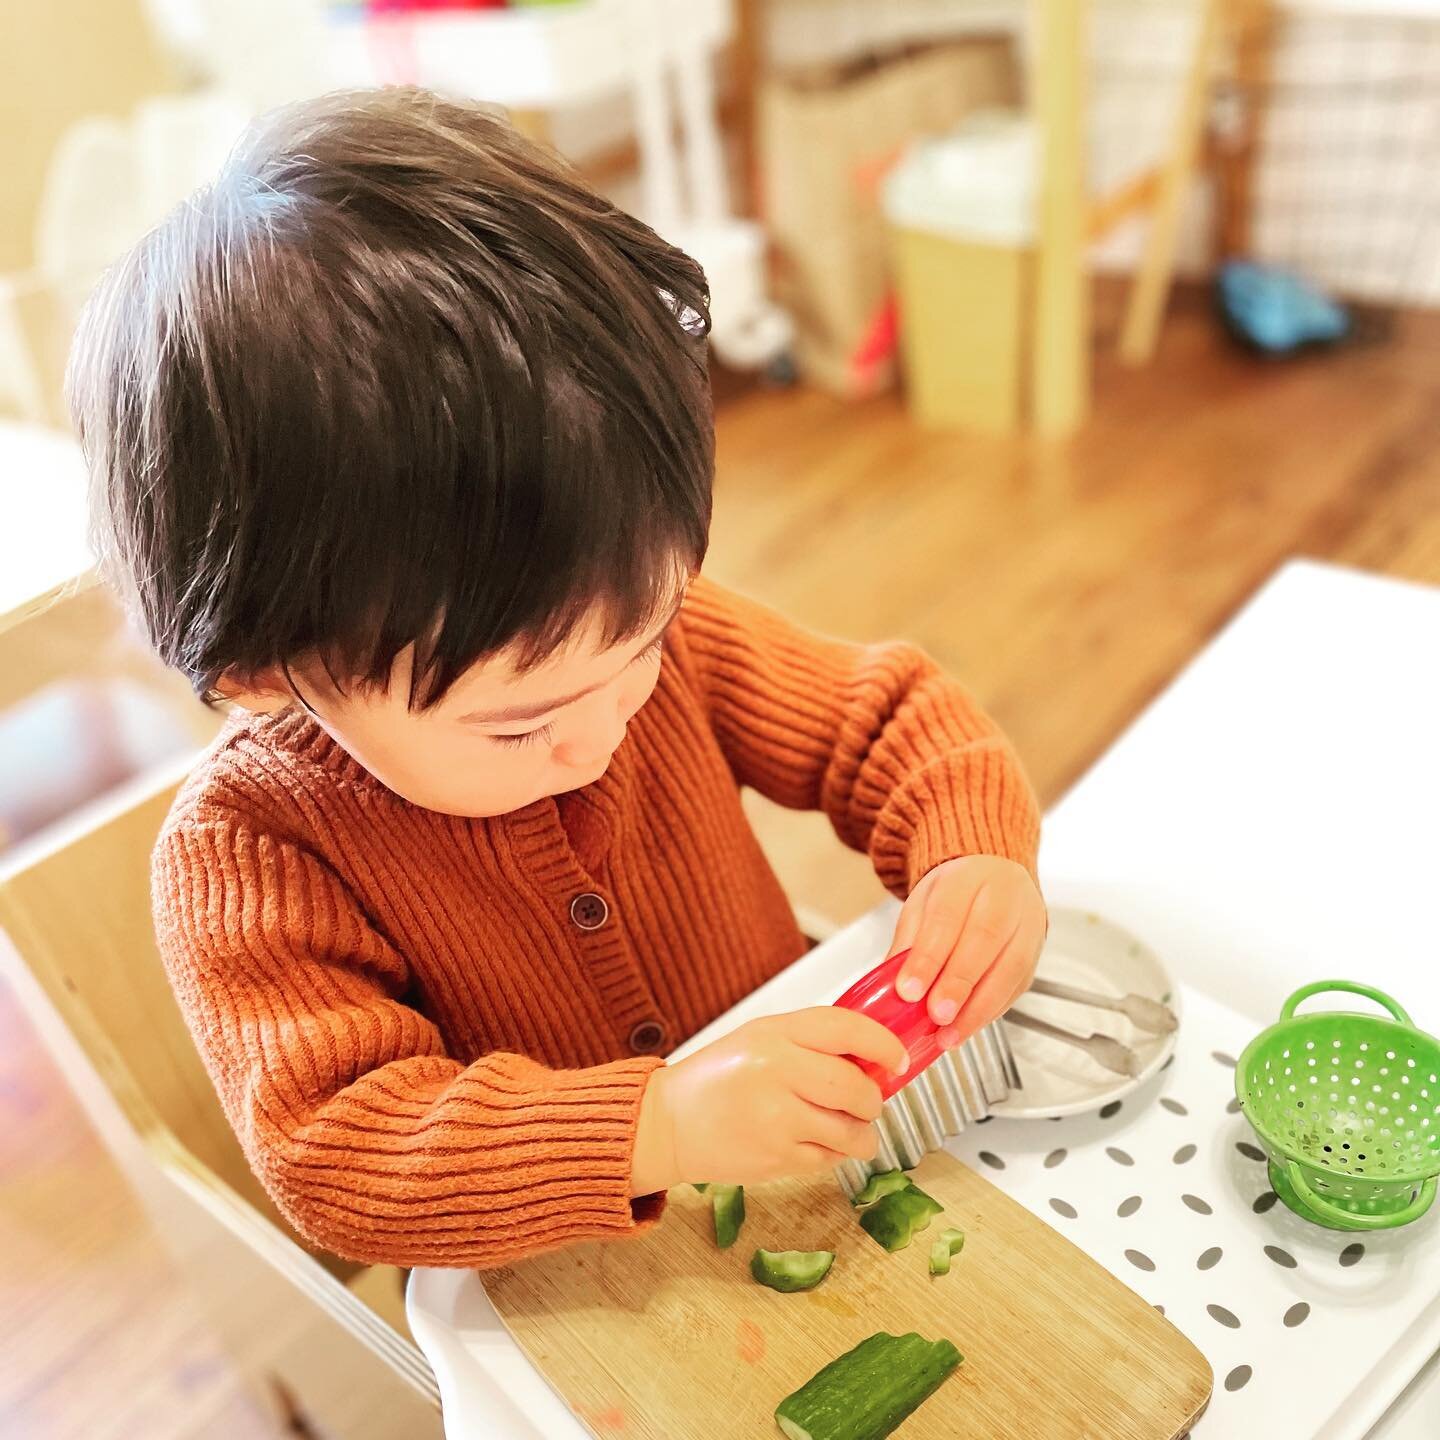 Cucumber cutting has been a big hit in our toddler community🥒

The setup is the same as the apple slicing. It simply promotes: 

⚫︎eye-hand coordination
⚫︎large motor skills
⚫︎maximun effort
⚫︎sense of care for self
⚫︎how to compost♻️

Make sure you